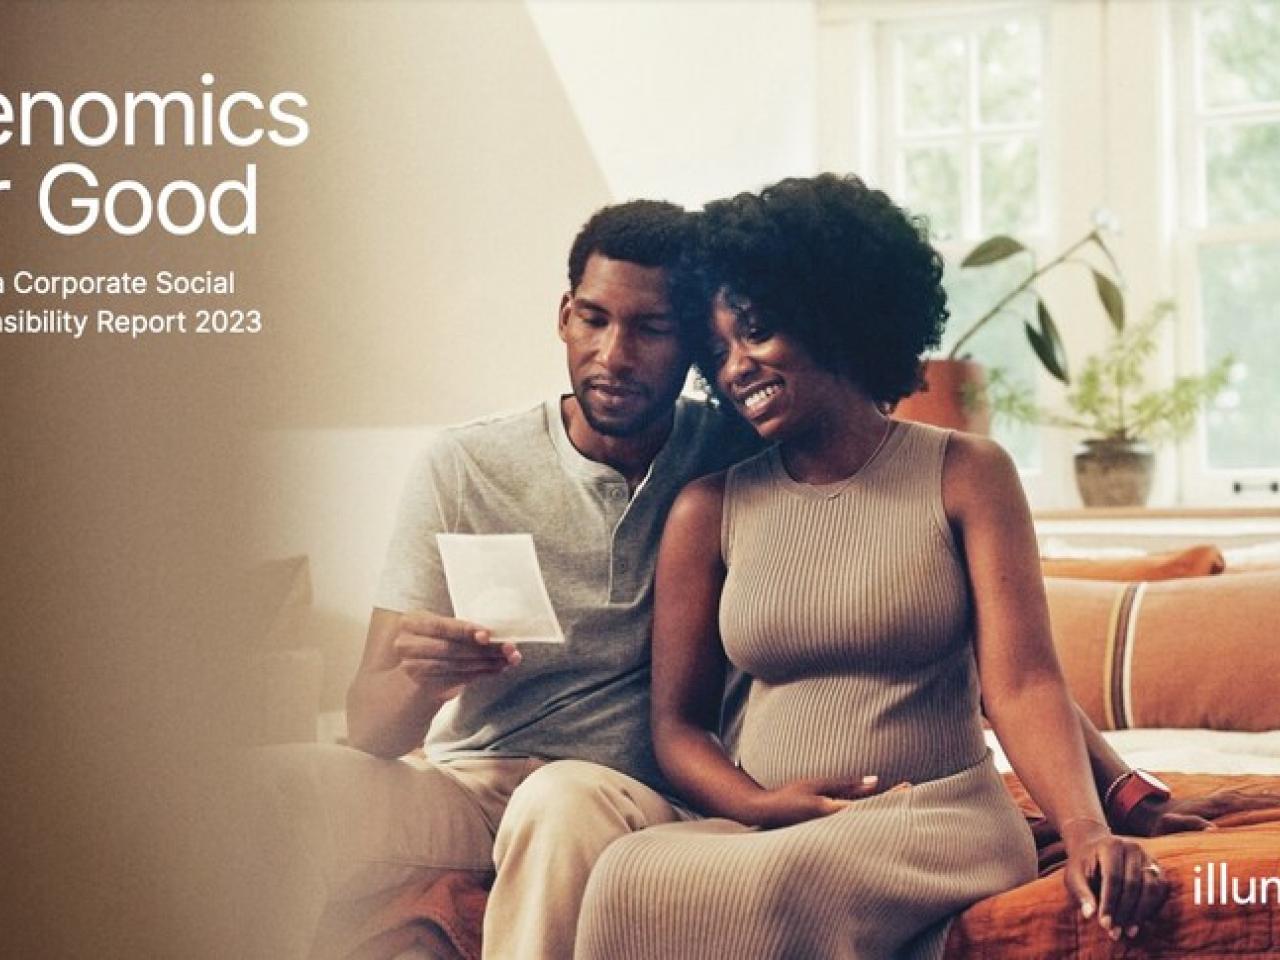 A couple looking at an image together. Reads: "Genomics for Good"